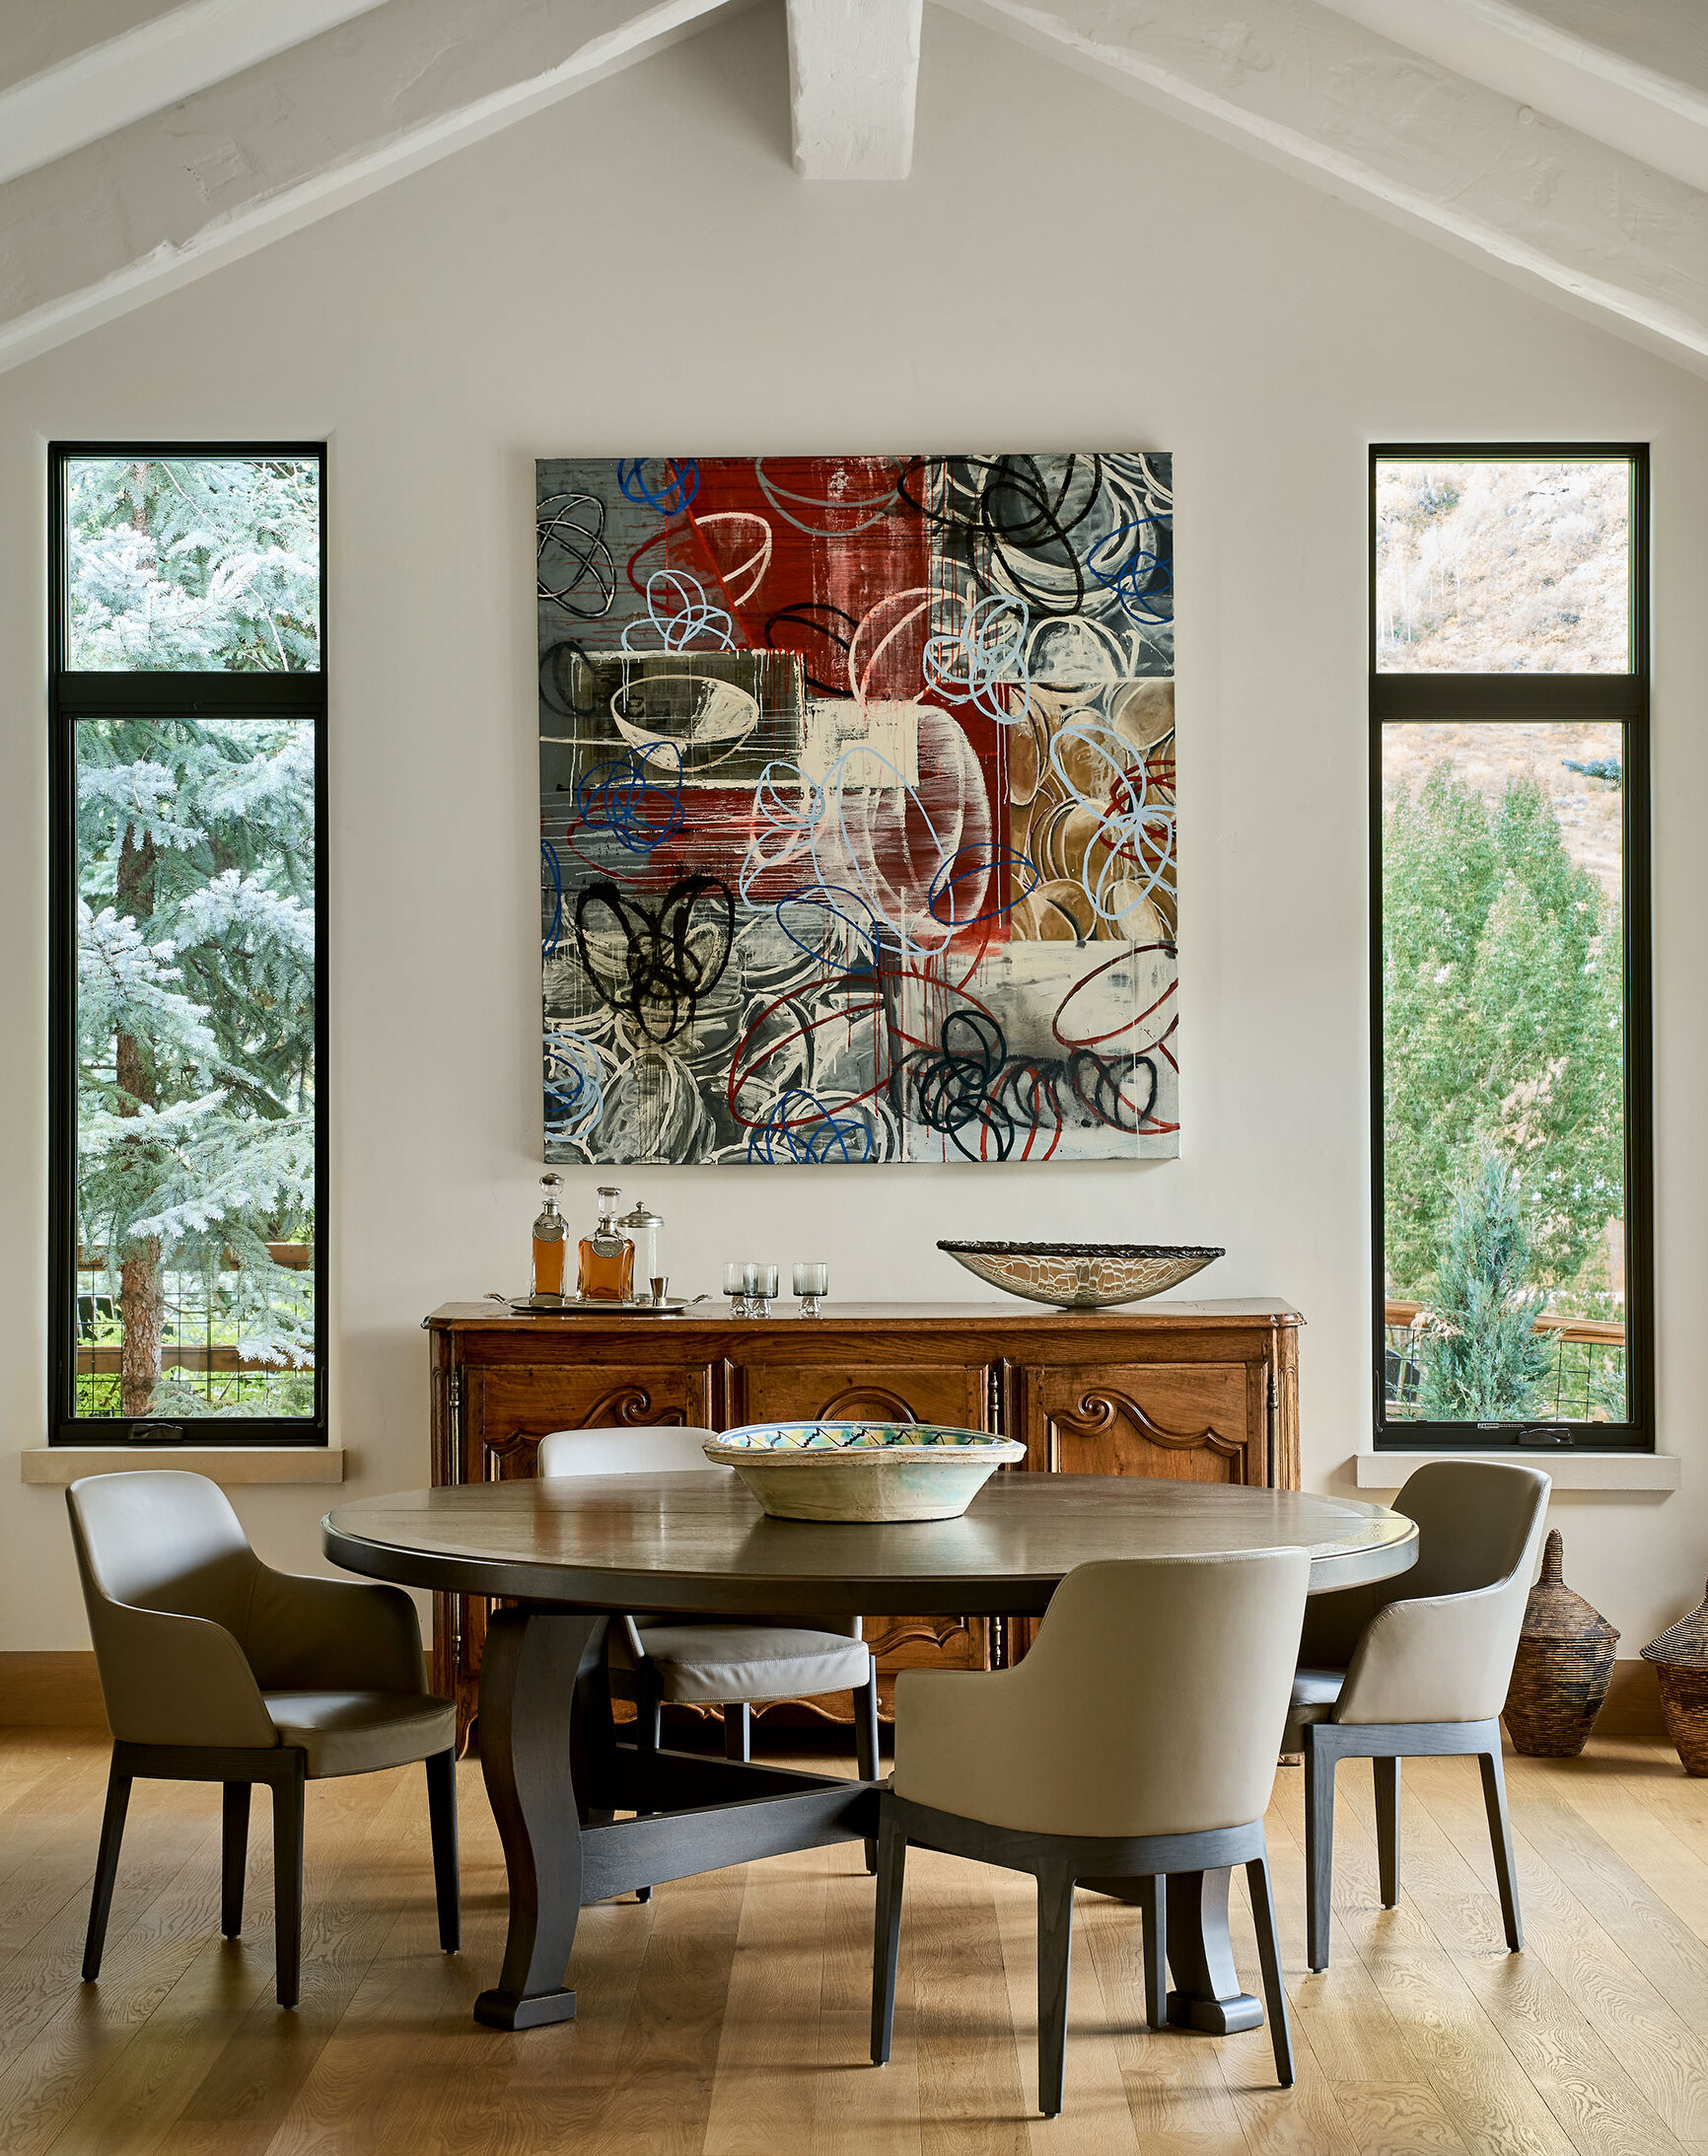 Dining room mixing modern dining chairs and art with an antique sideboard and traditional dining table.